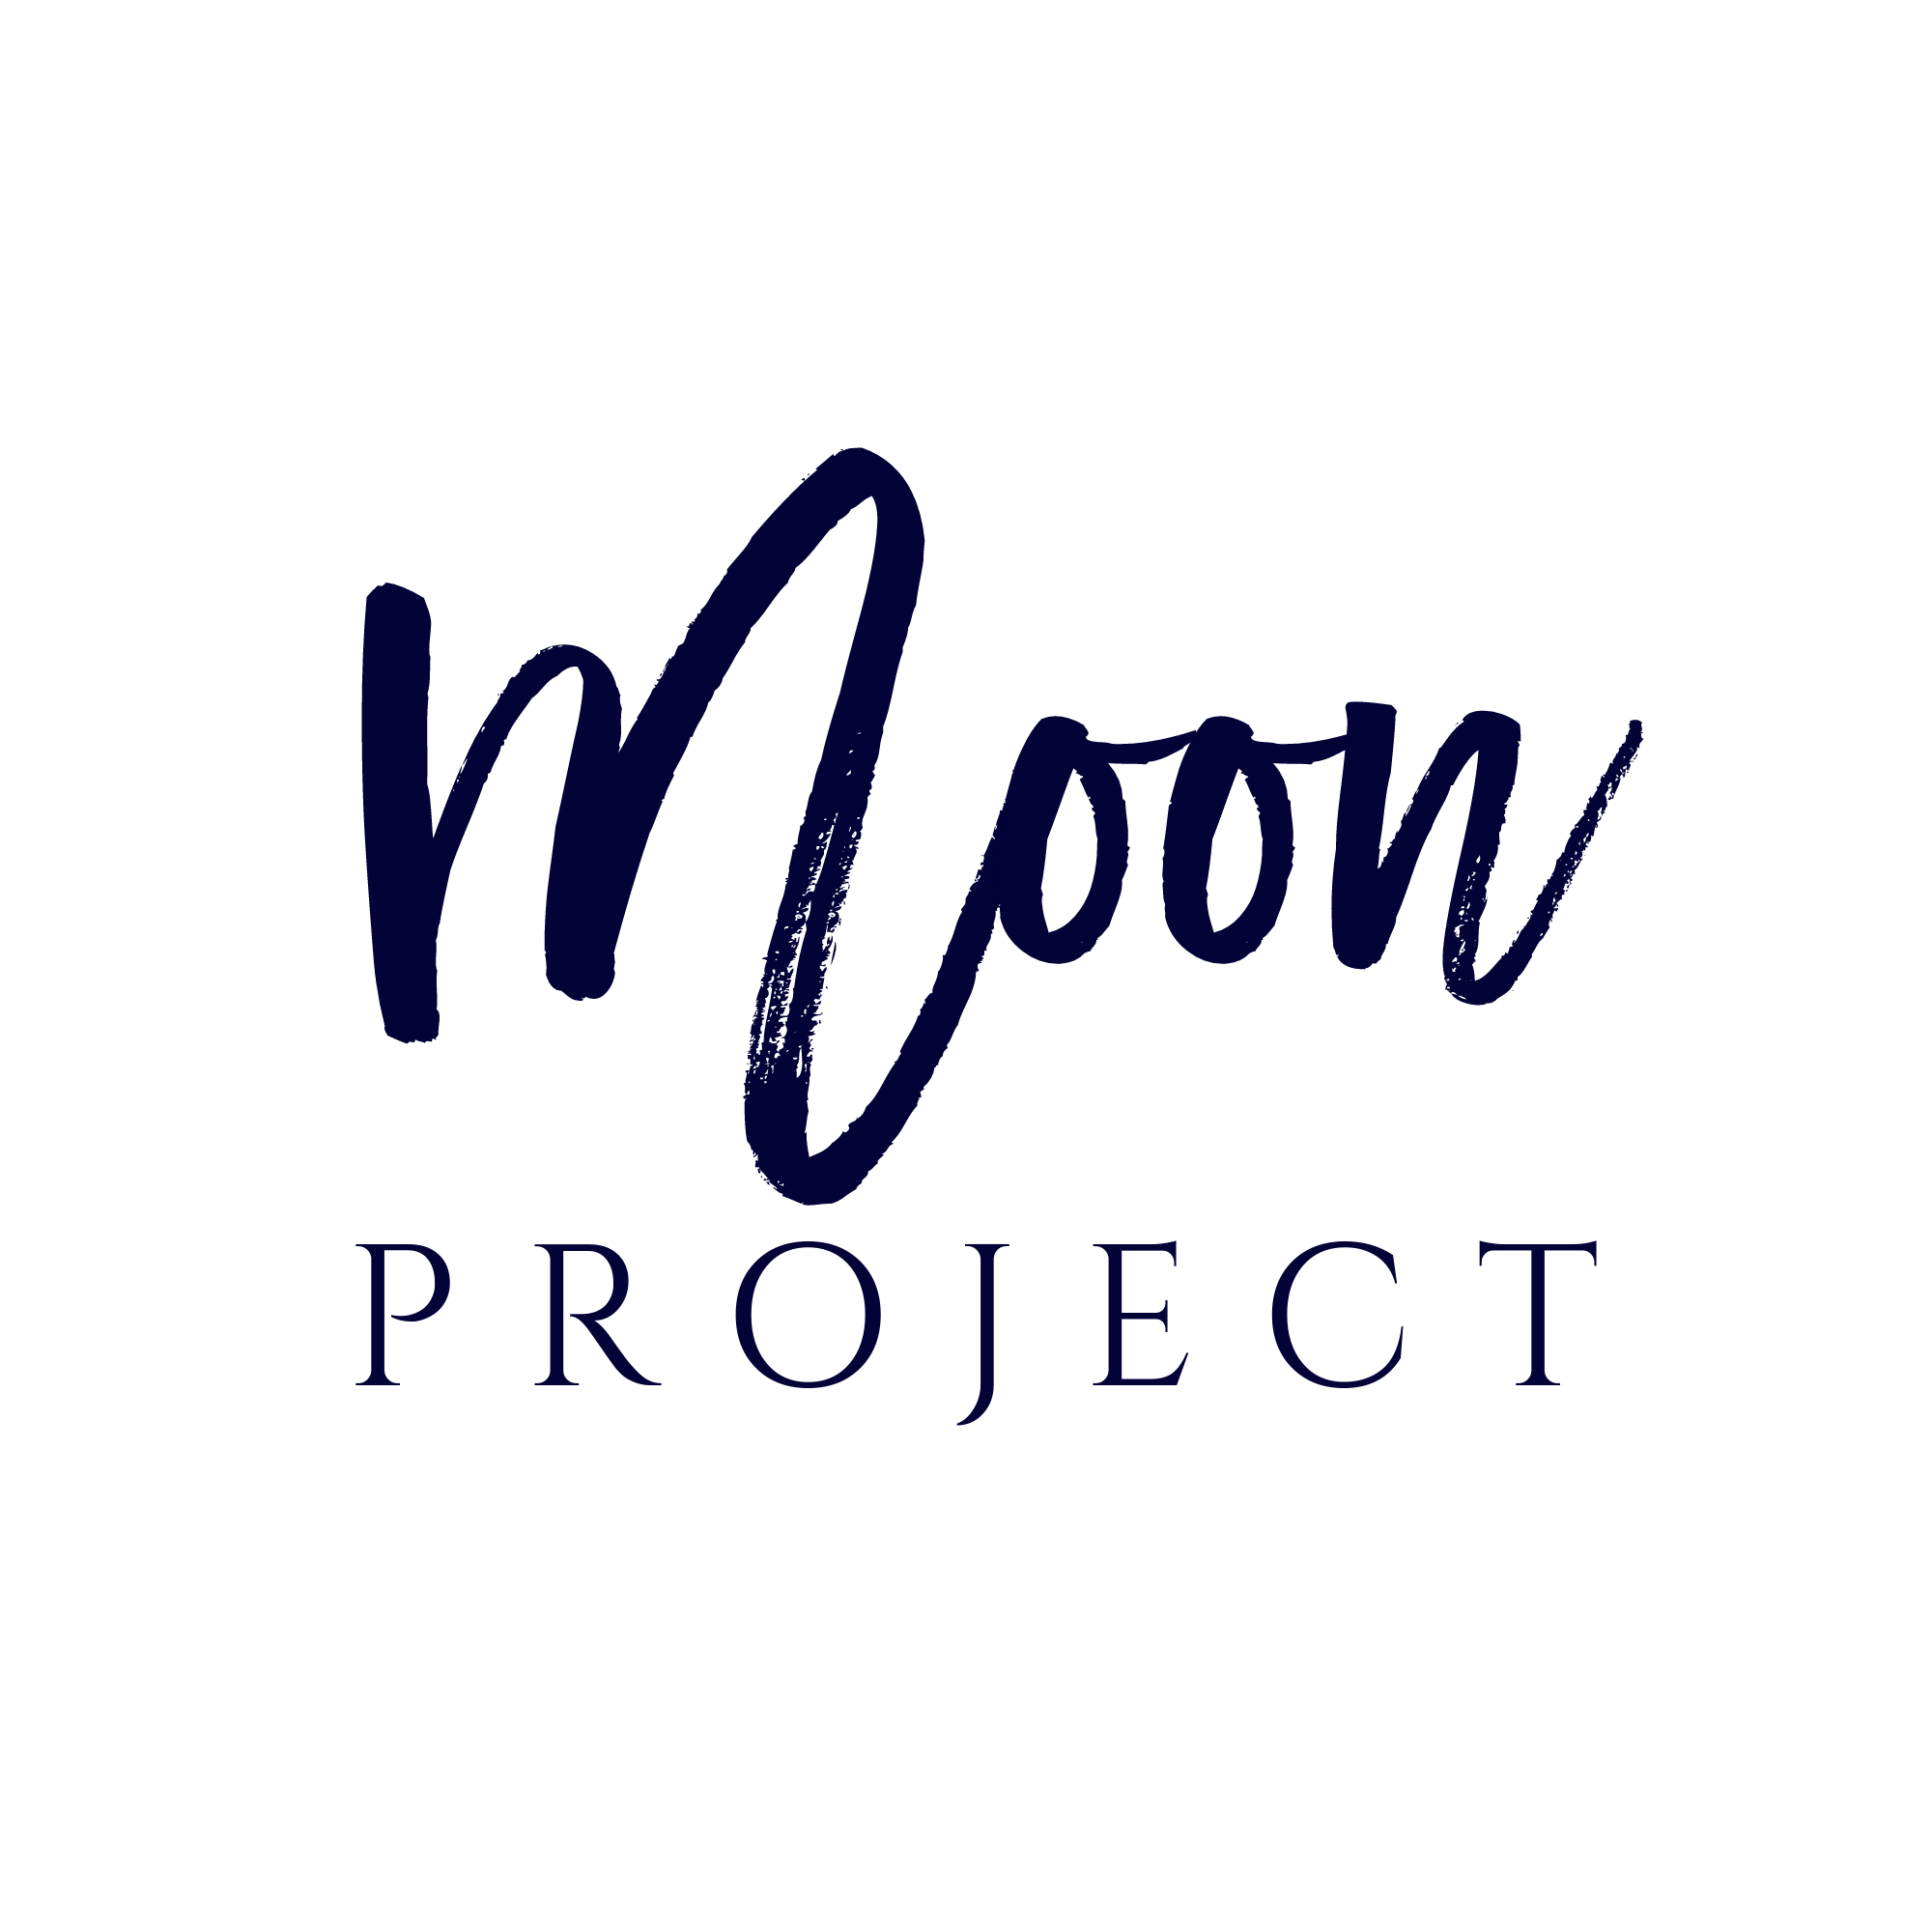 Moon Project